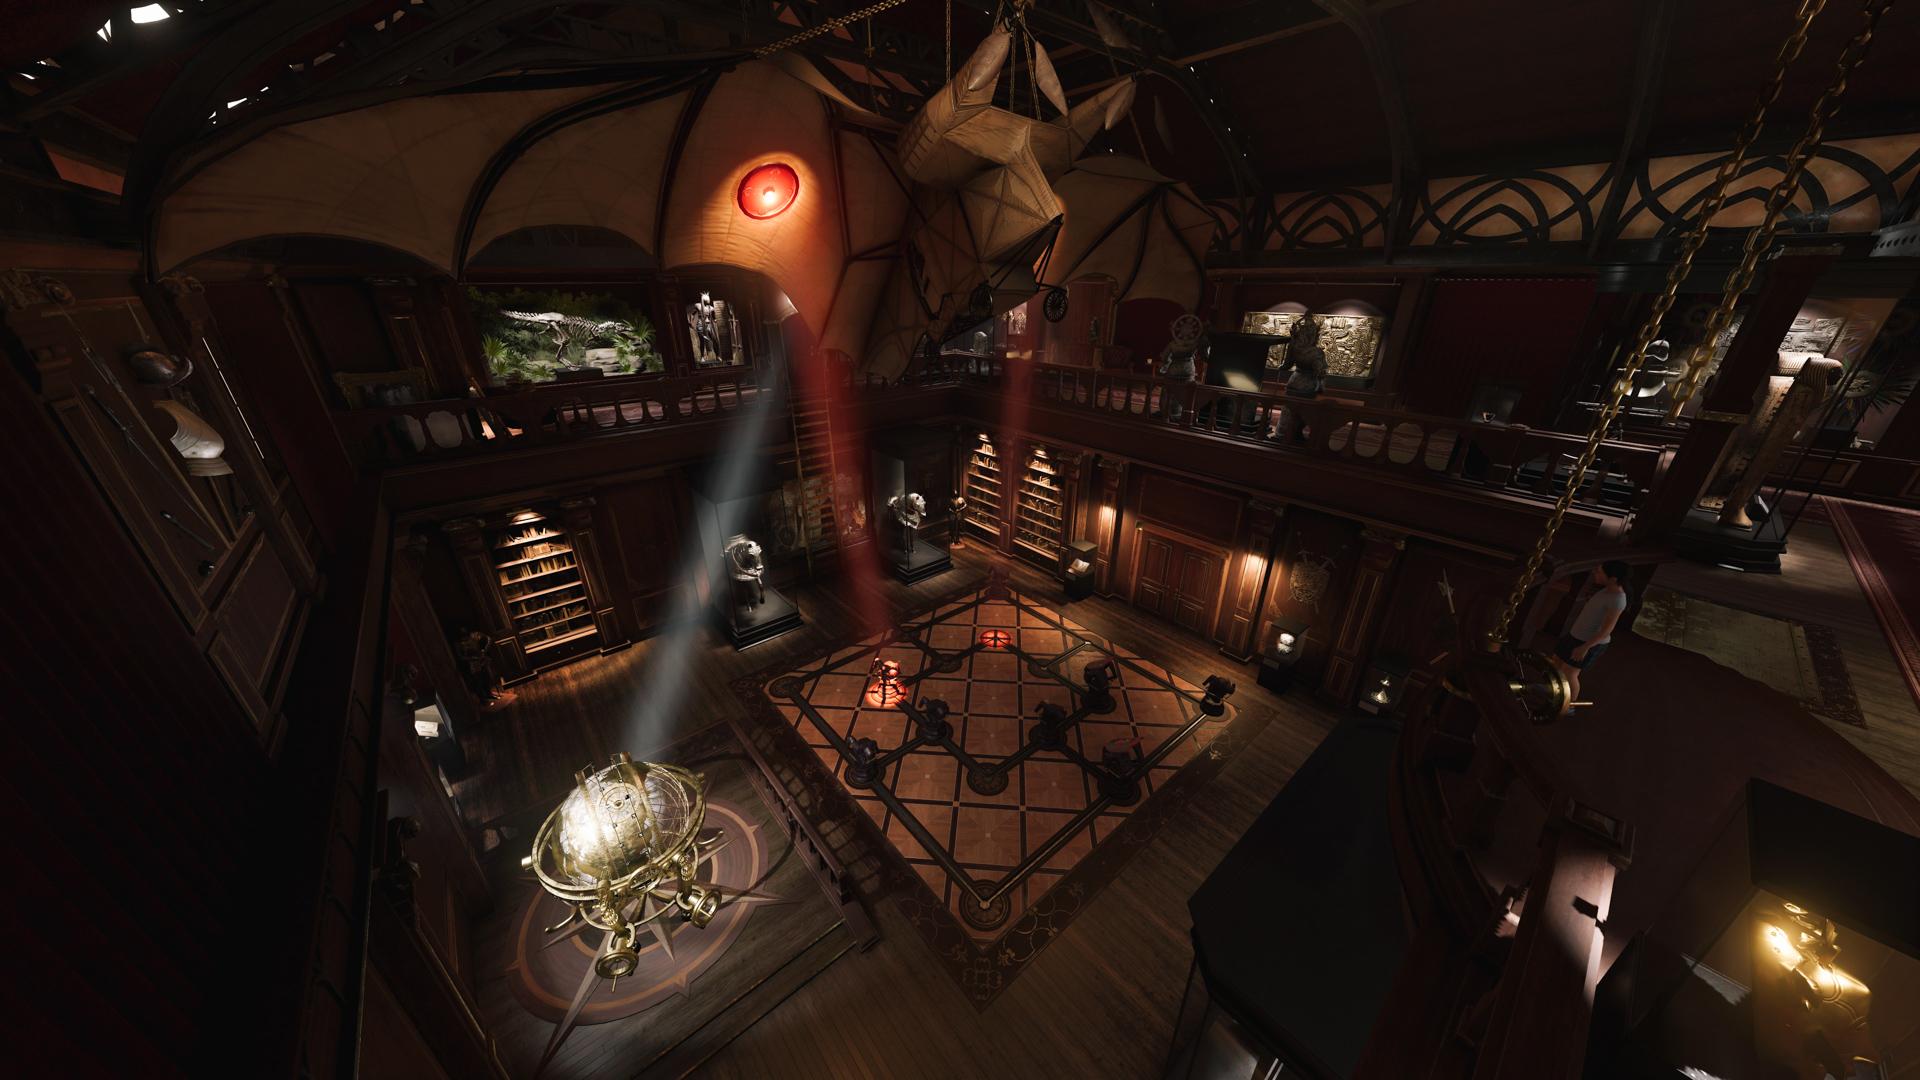 The White Queen puzzle room in Shadow of the Tomb Raider's Croft Manor level.